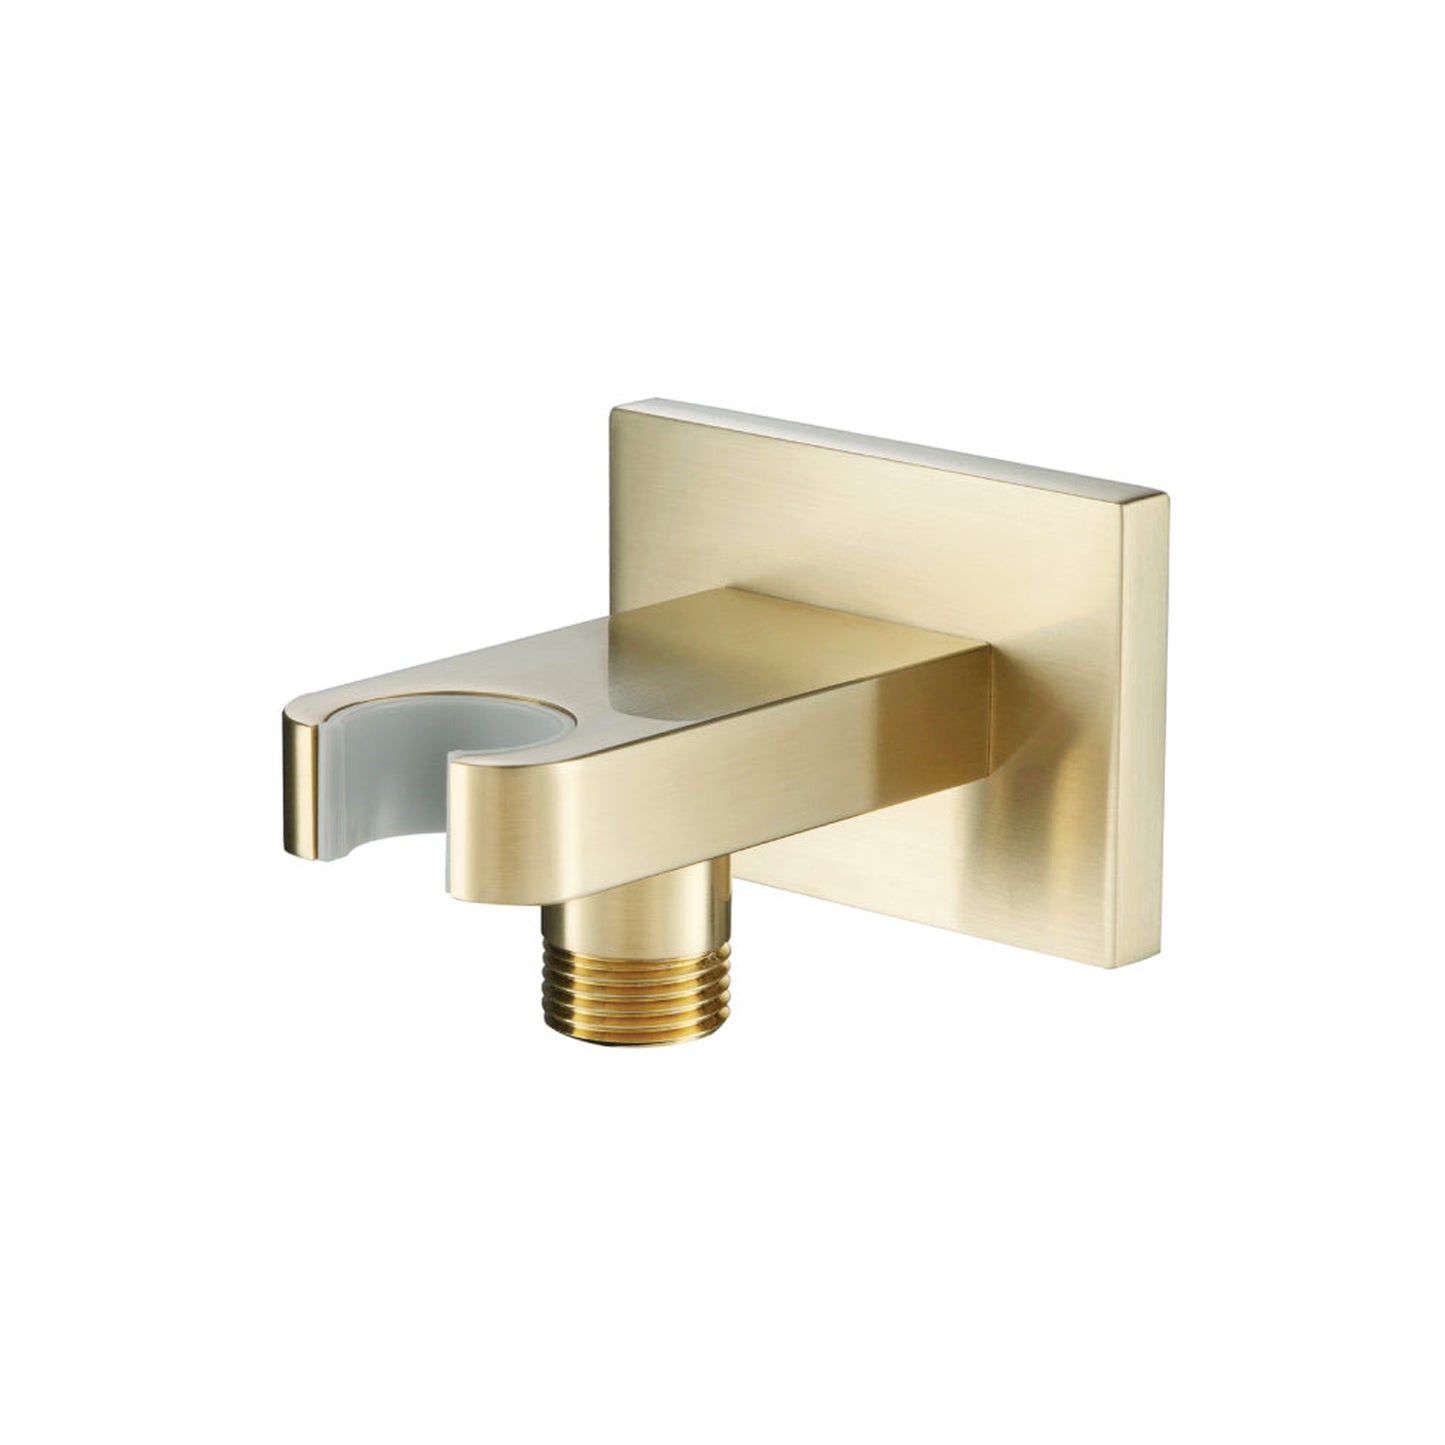 Isenberg Universal Fixtures Wall Elbow With Combo Holder in Satin Brass (HS8007SB)